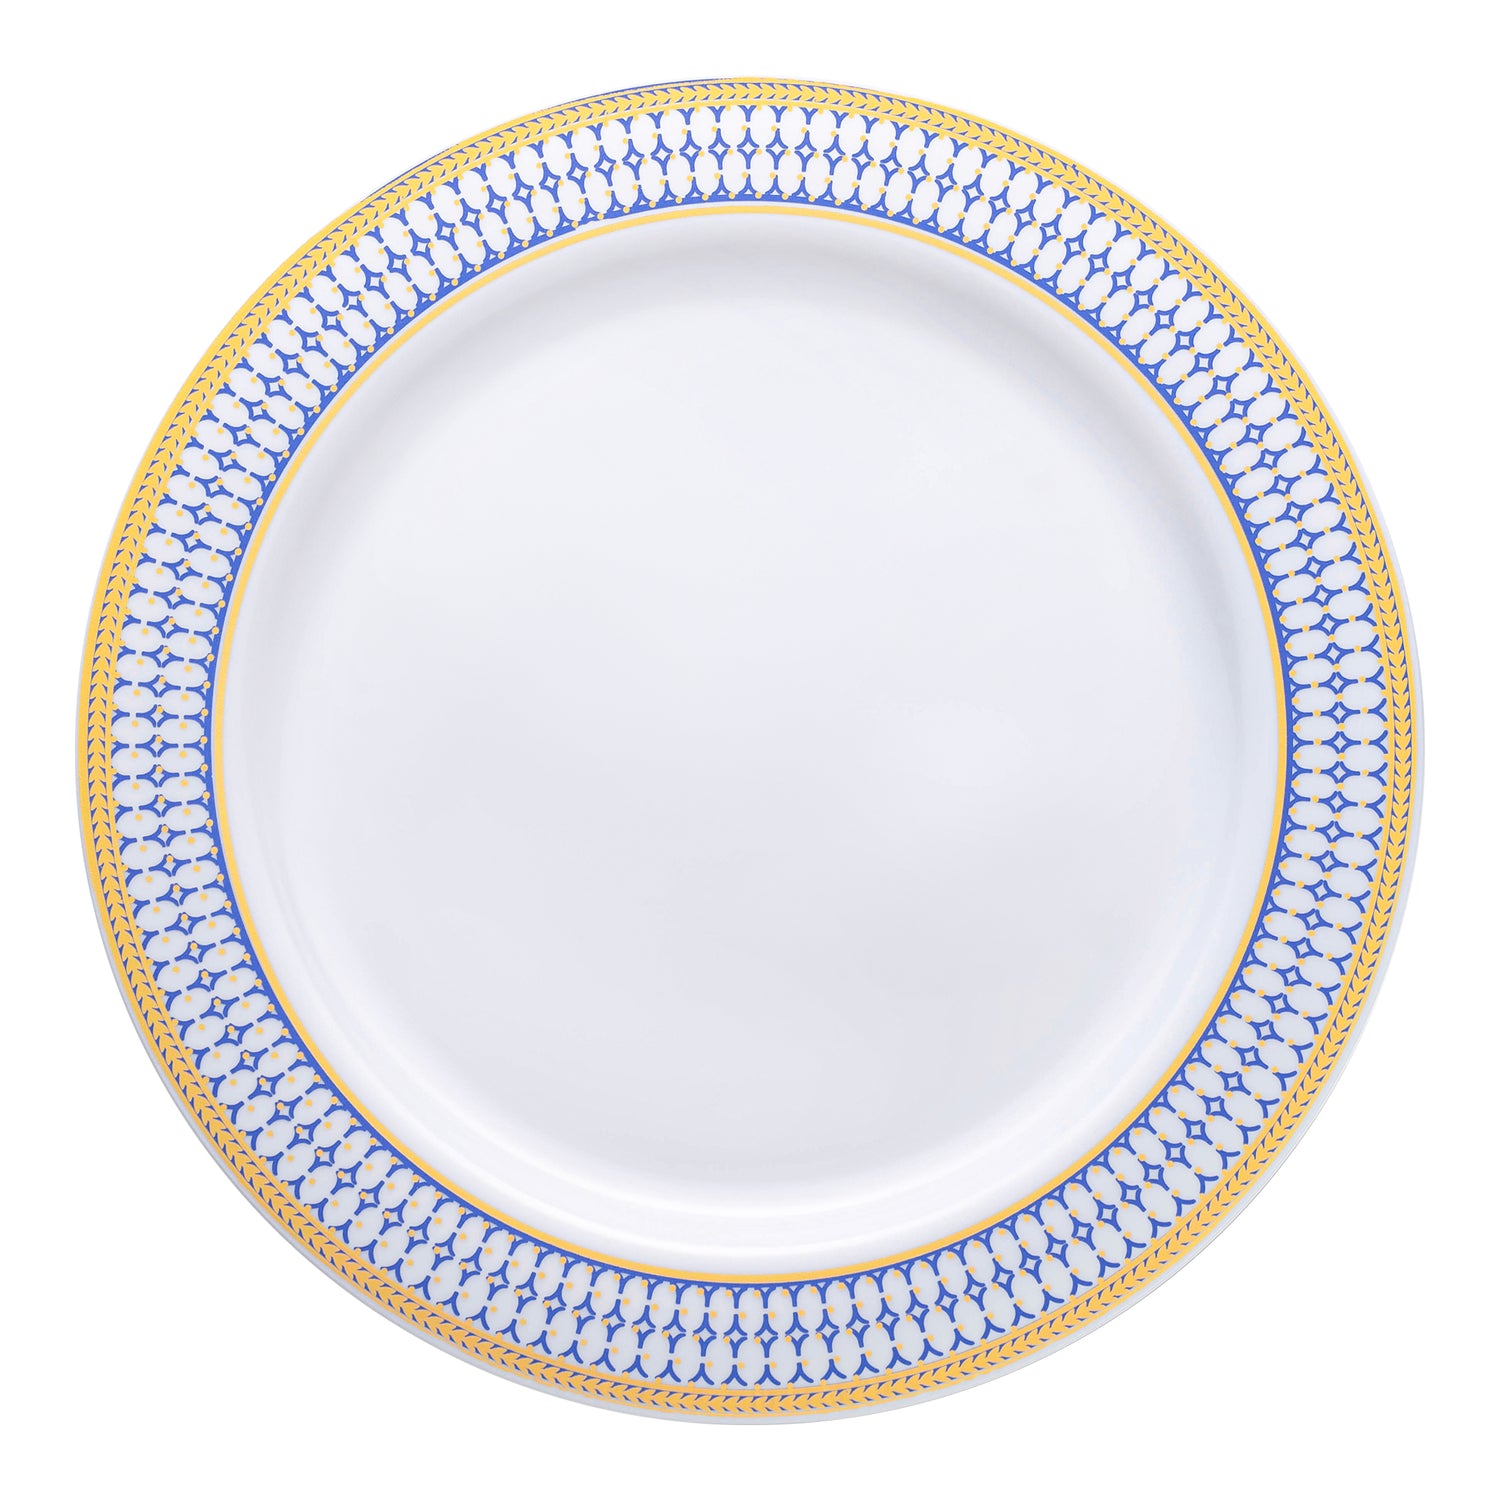 White with Blue and Gold Chord Rim Plastic Appetizer/Salad Plates (7.5") | The Kaya Collection